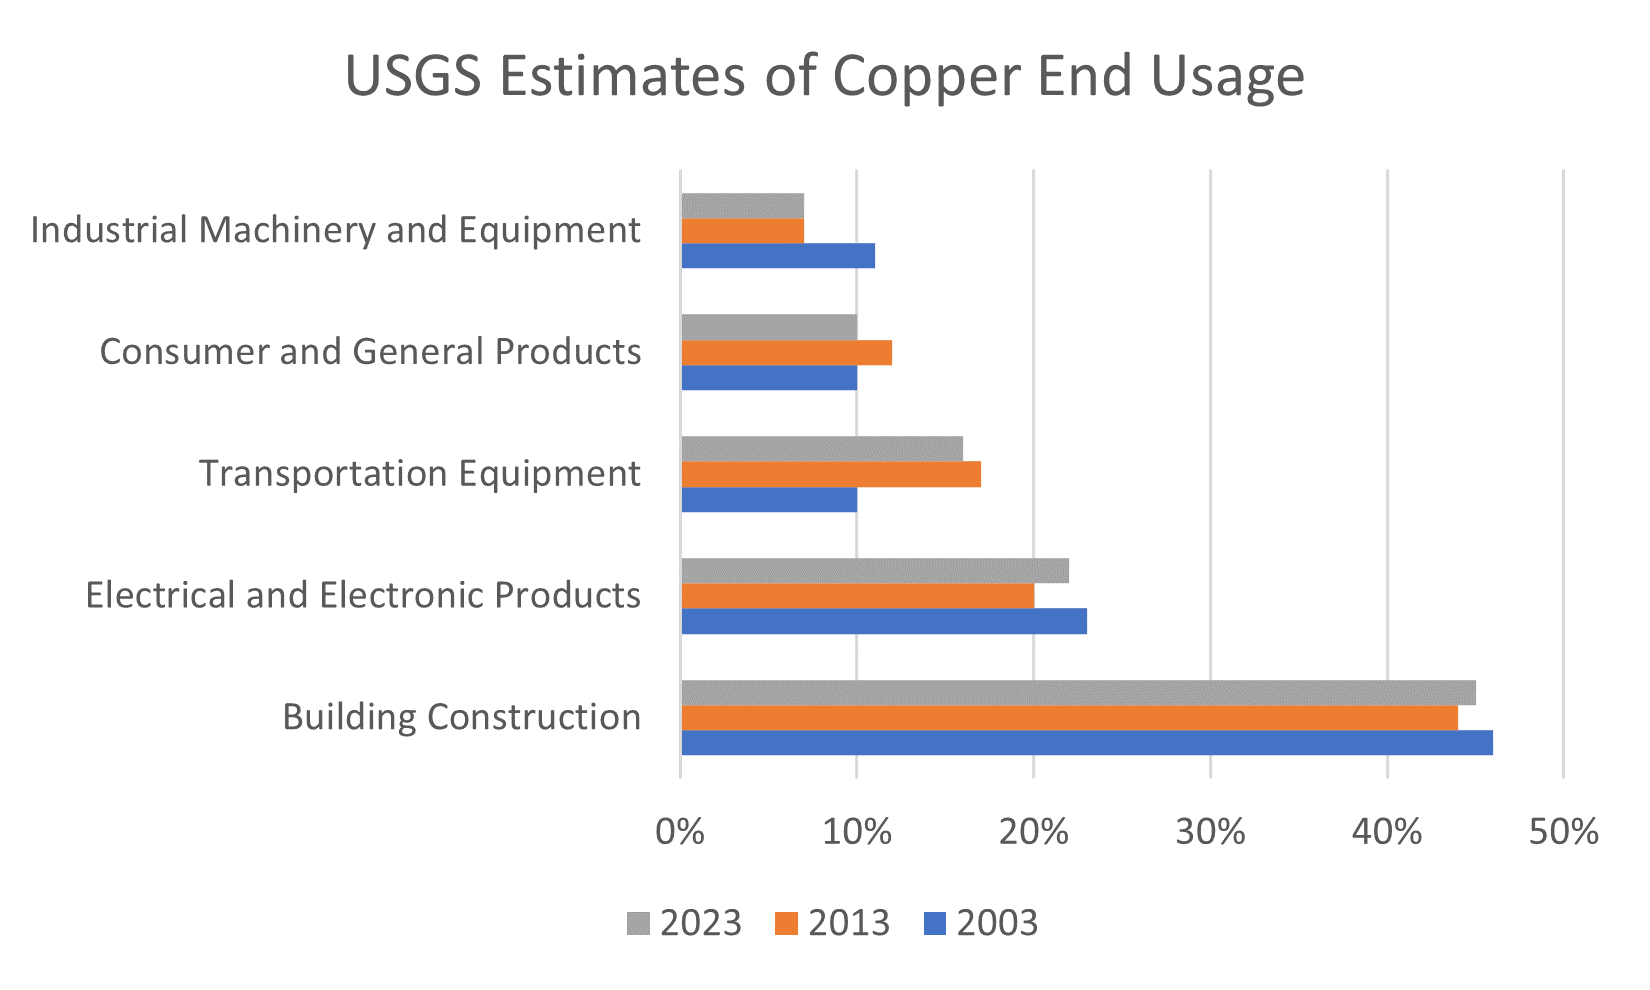 Dr Copper got her PhD in Economics due to the close relationship between US construction and copper demand. Over the past two decades, the dominant US usage of copper has been building. Source: USGS.